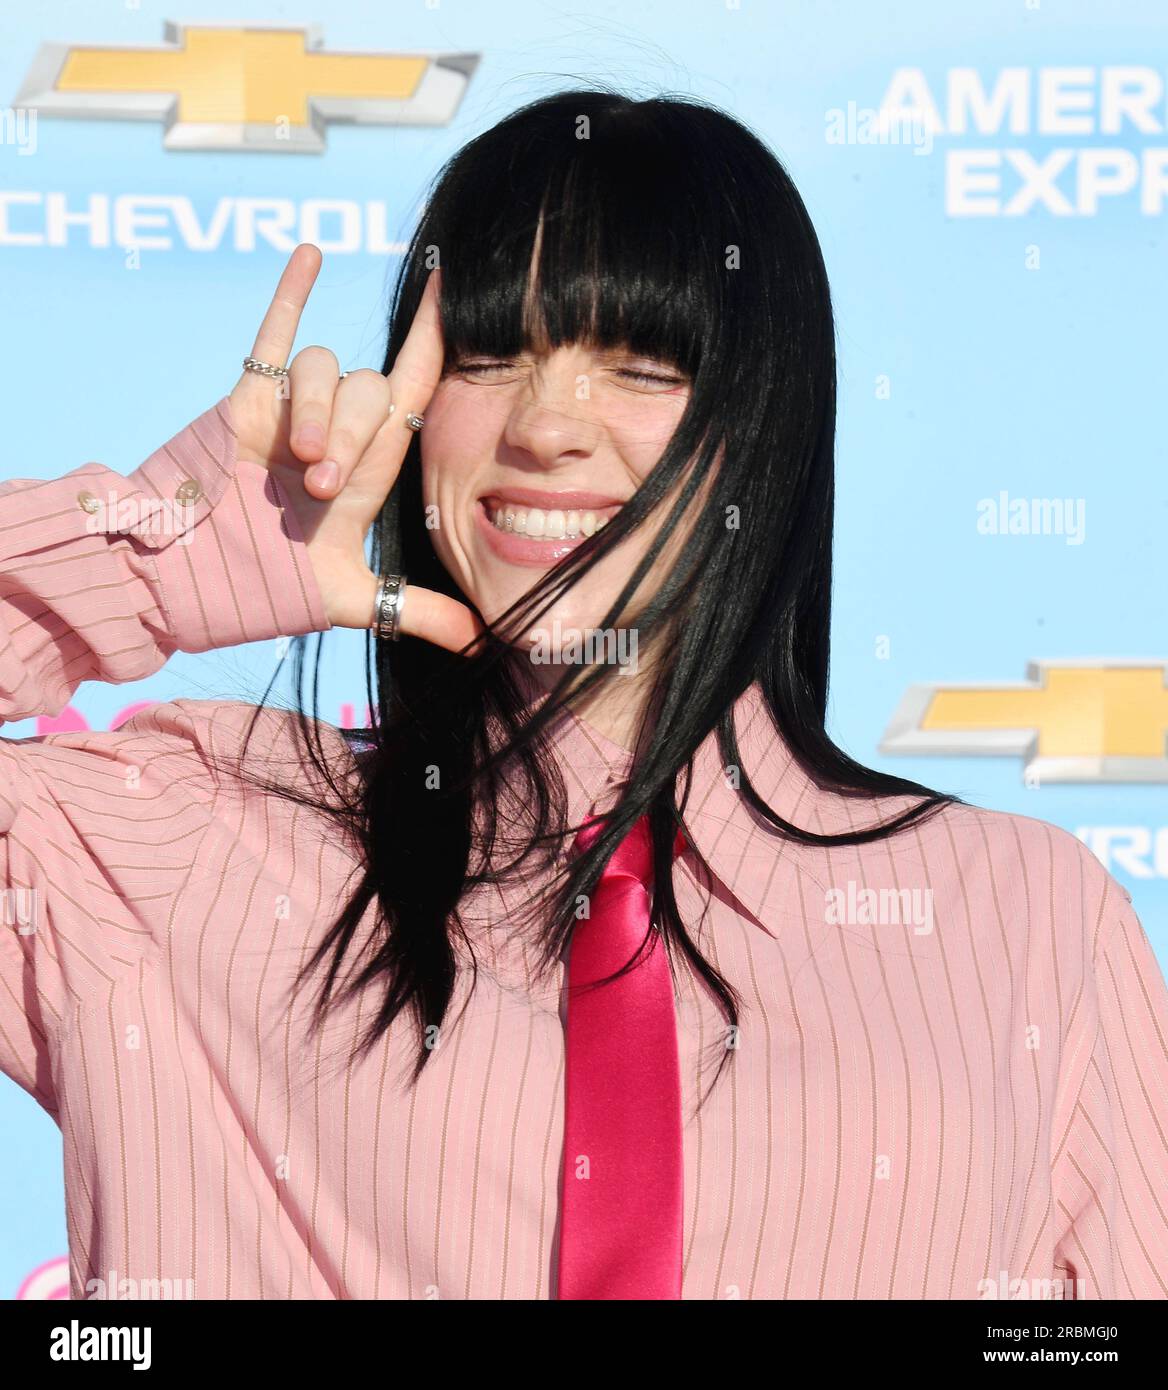 Los Angeles, California, USA. 09th July, 2023. Billie Eilish attends the World Premiere of 'Barbie' at the Shrine Auditorium and Expo Hall on July 09, 2023 in Los Angeles, California. Credit: Jeffrey Mayer/Jtm Photos/Media Punch/Alamy Live News Stock Photo